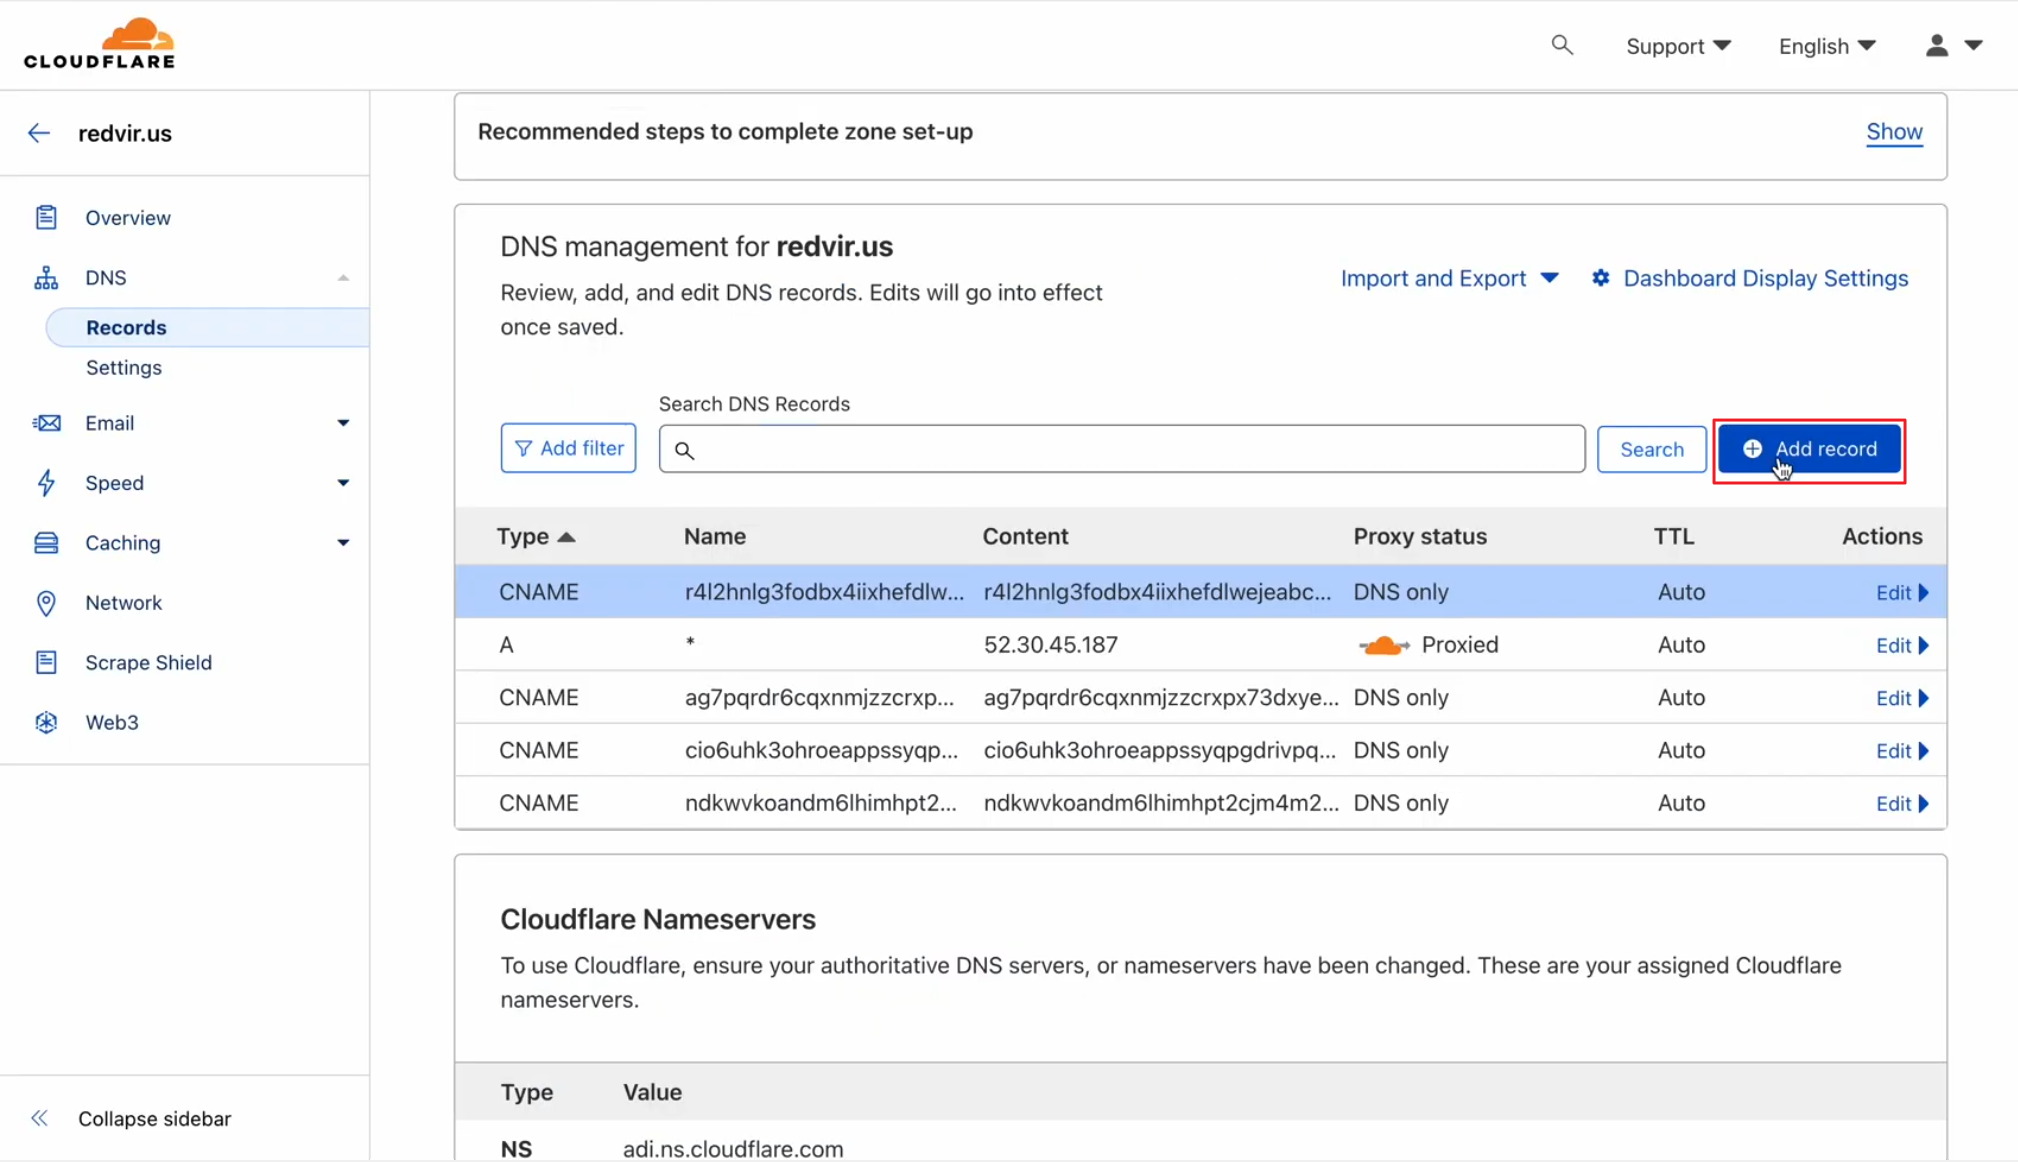 Adding record in your DNS Management